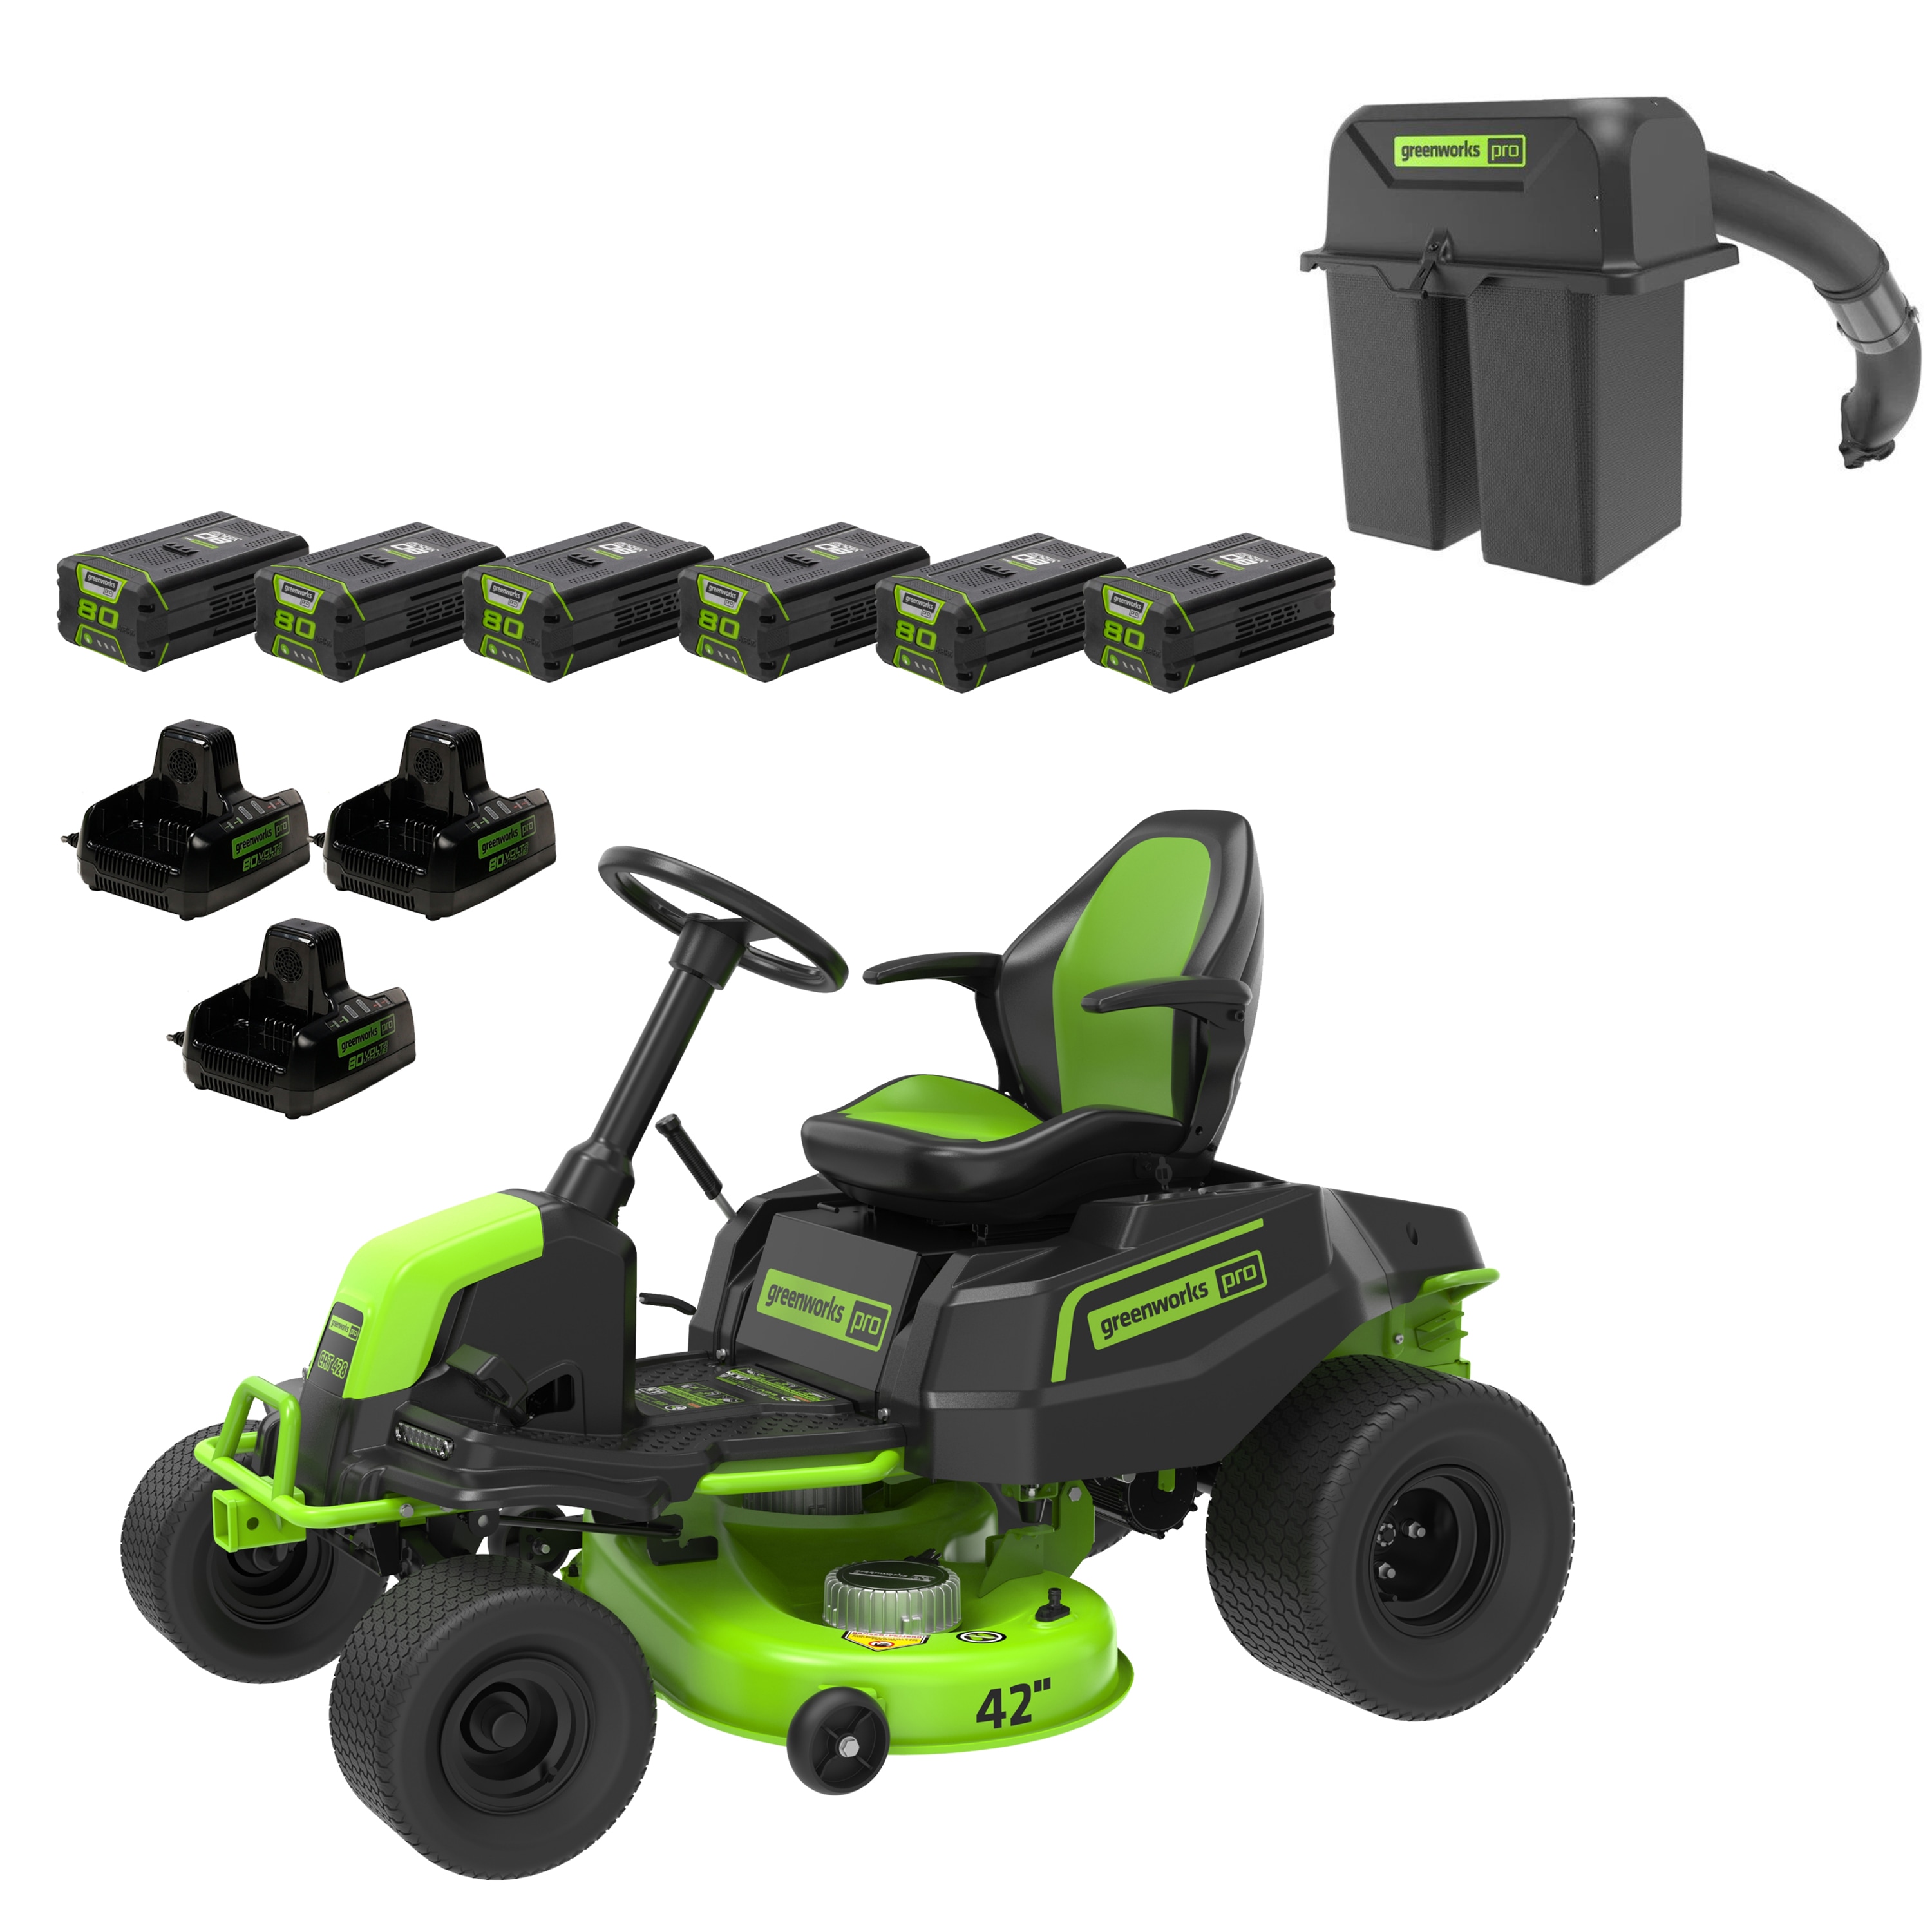 Greenworks Pro Crossover Tractor 42-in Lithium Ion Electric Riding Lawn Mower and Bagger Combo Kit